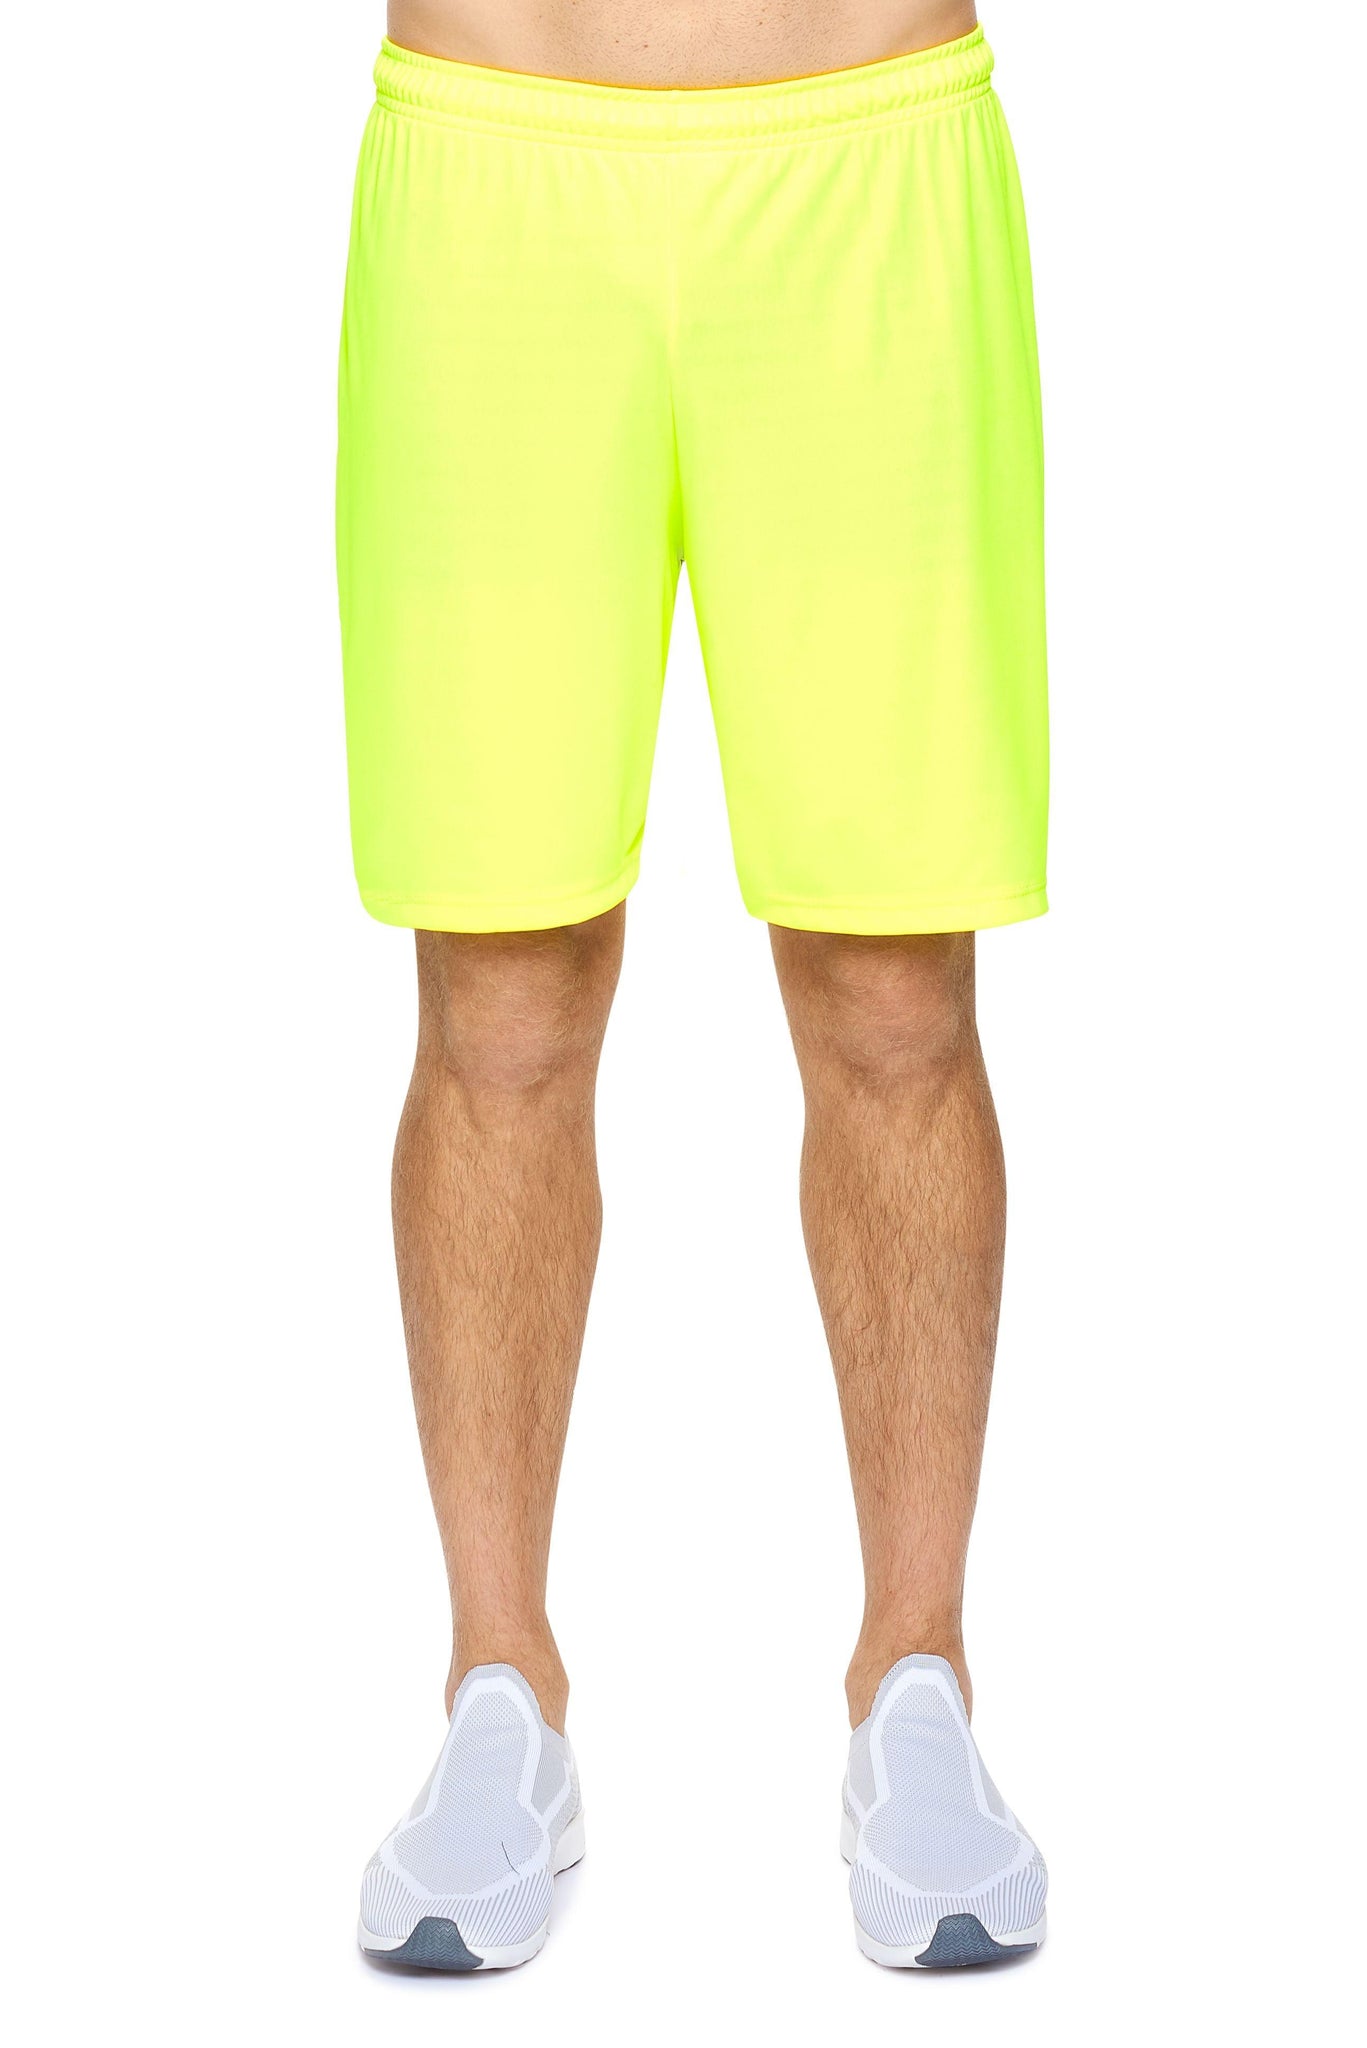 Expert Brand Men's Safety Yellow pk MaX™ Impact Shorts#safety-yellow